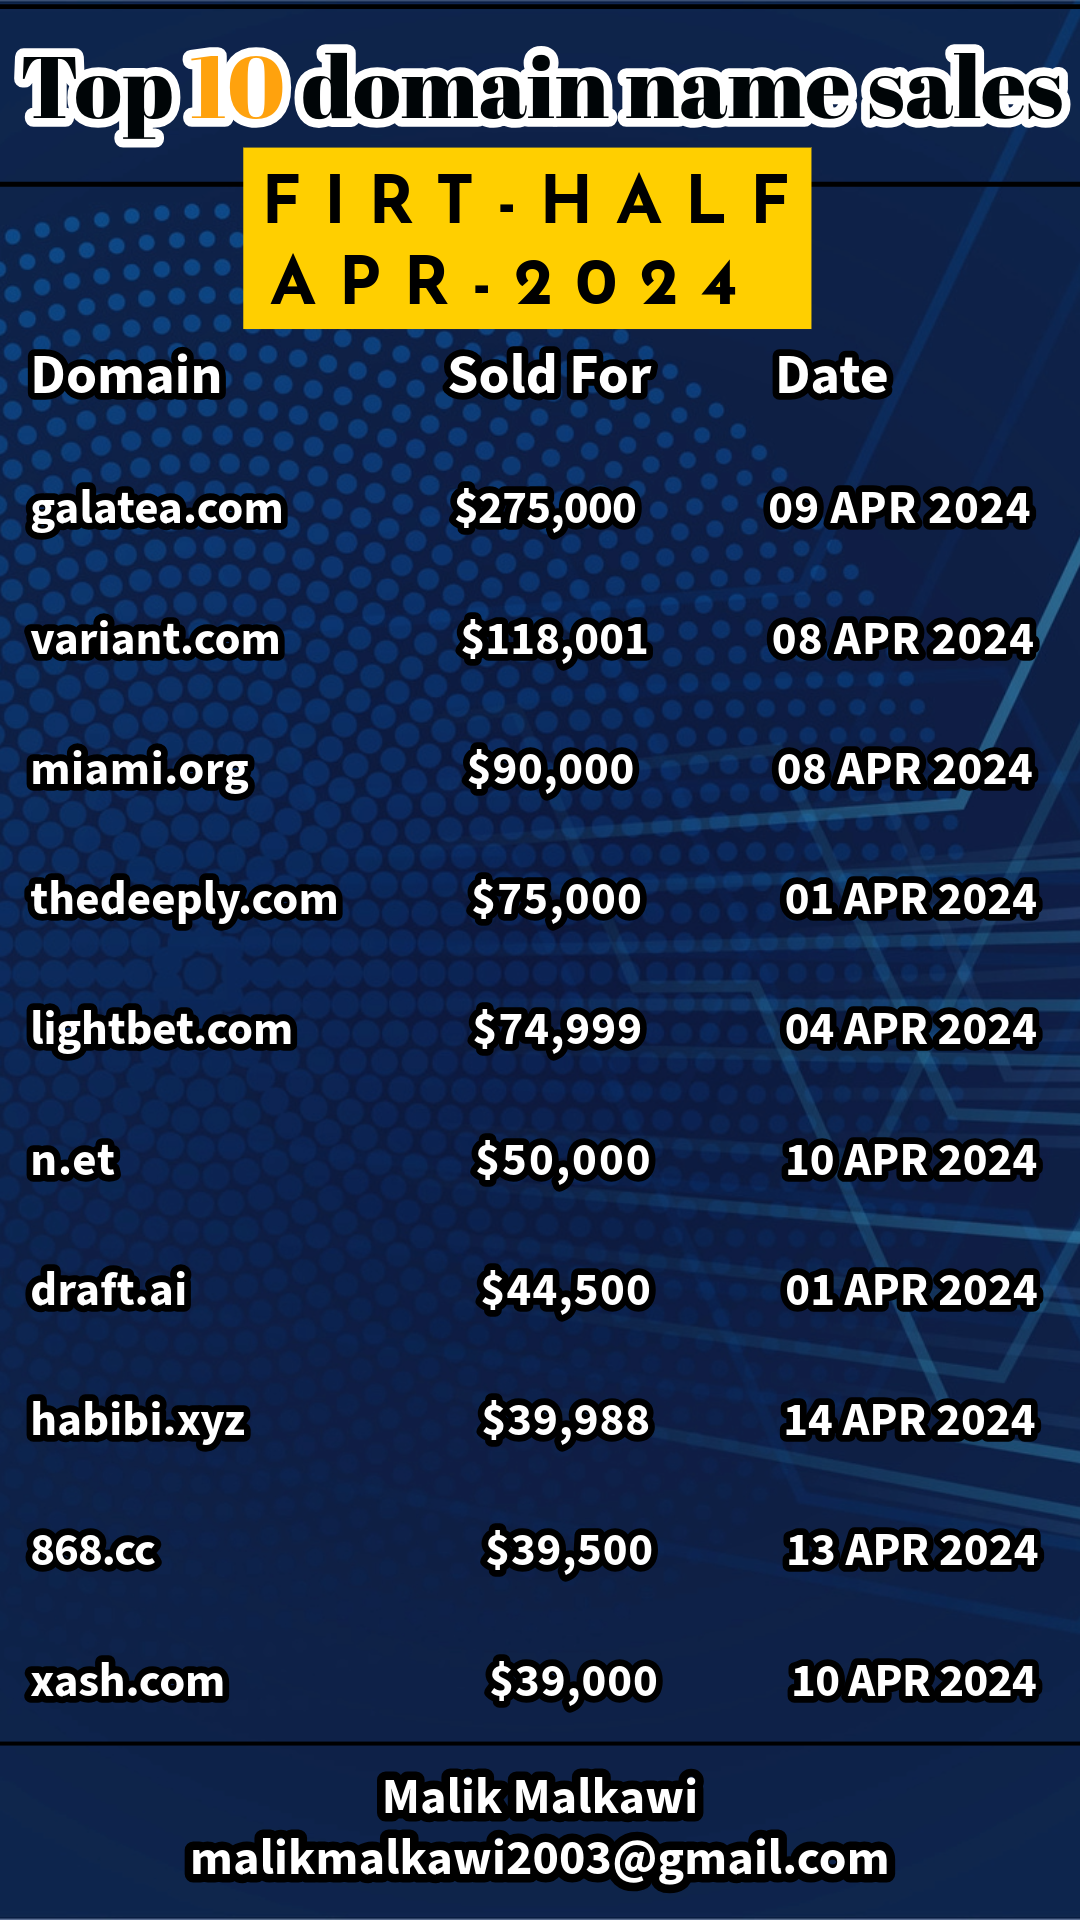 TOP 10 Domains sold (FIRST HALF APR 2024).png